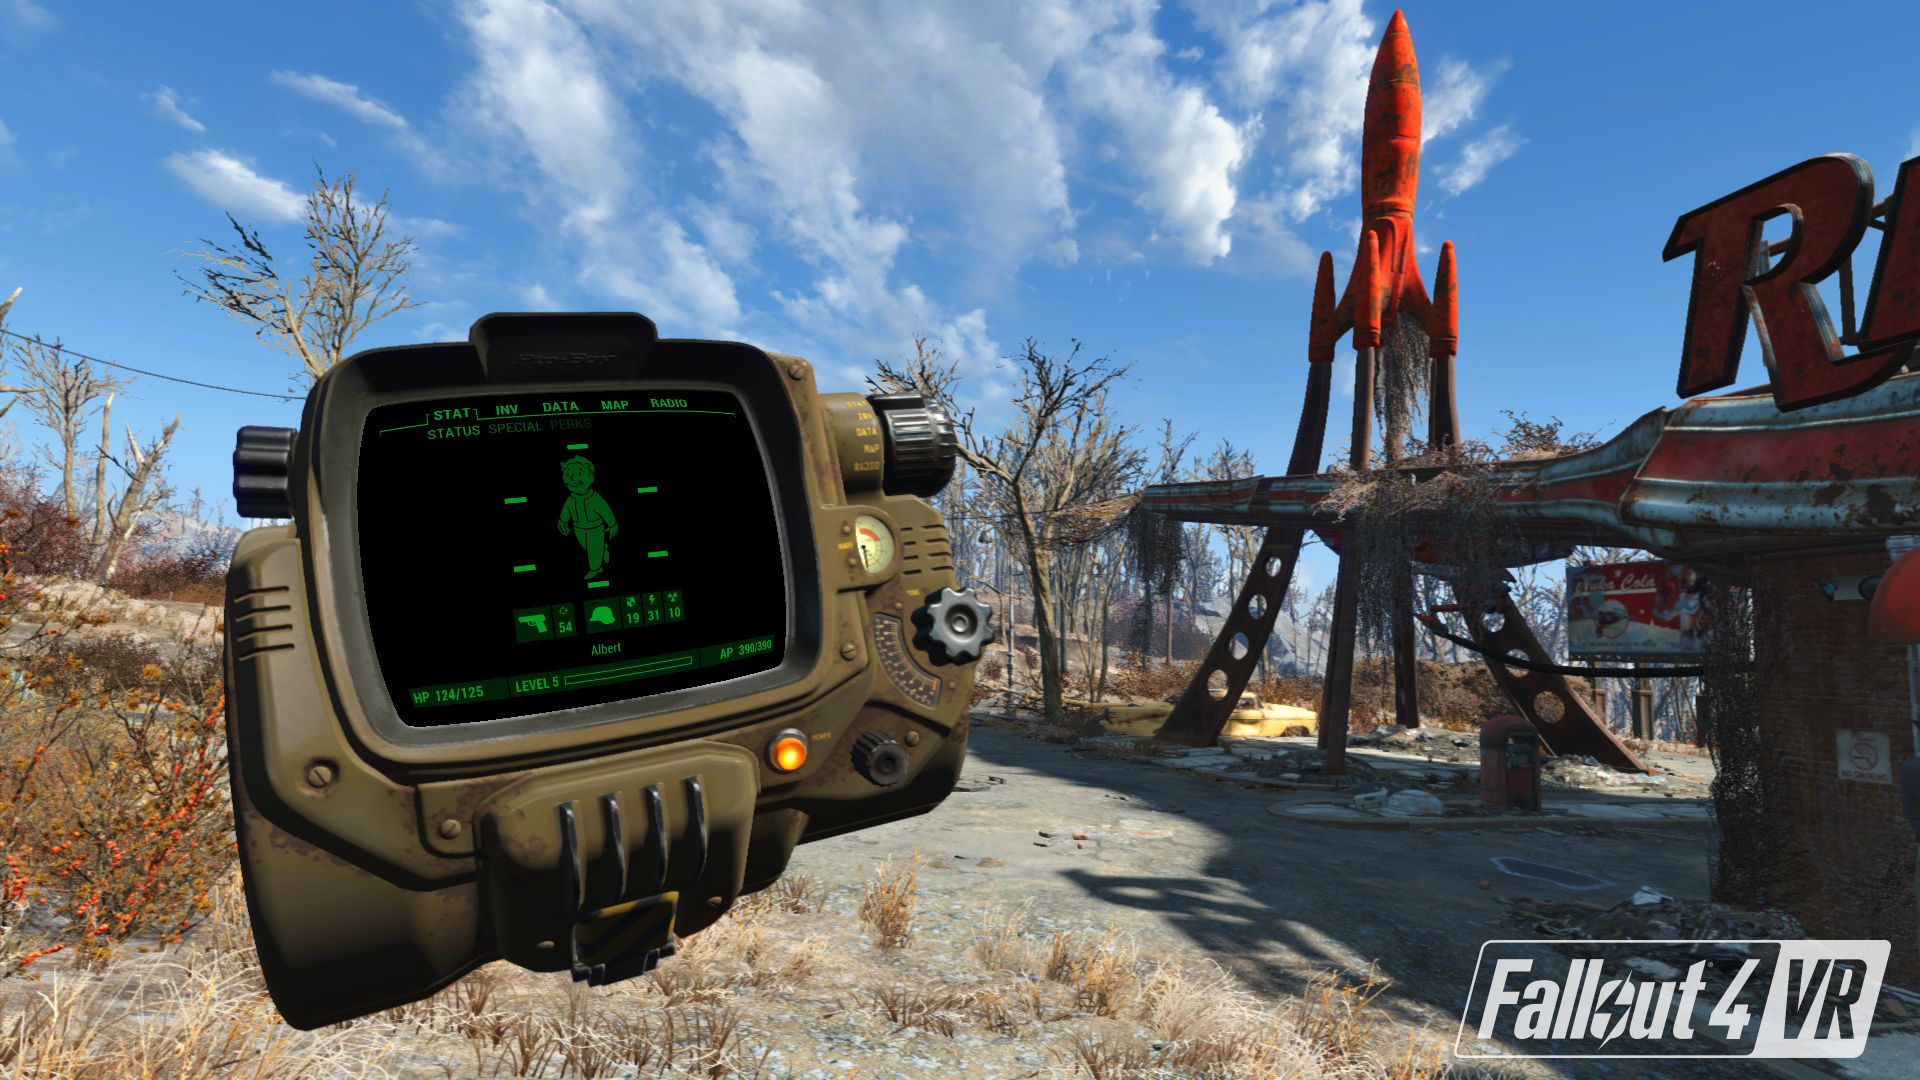 Fallout 4 VR - 1